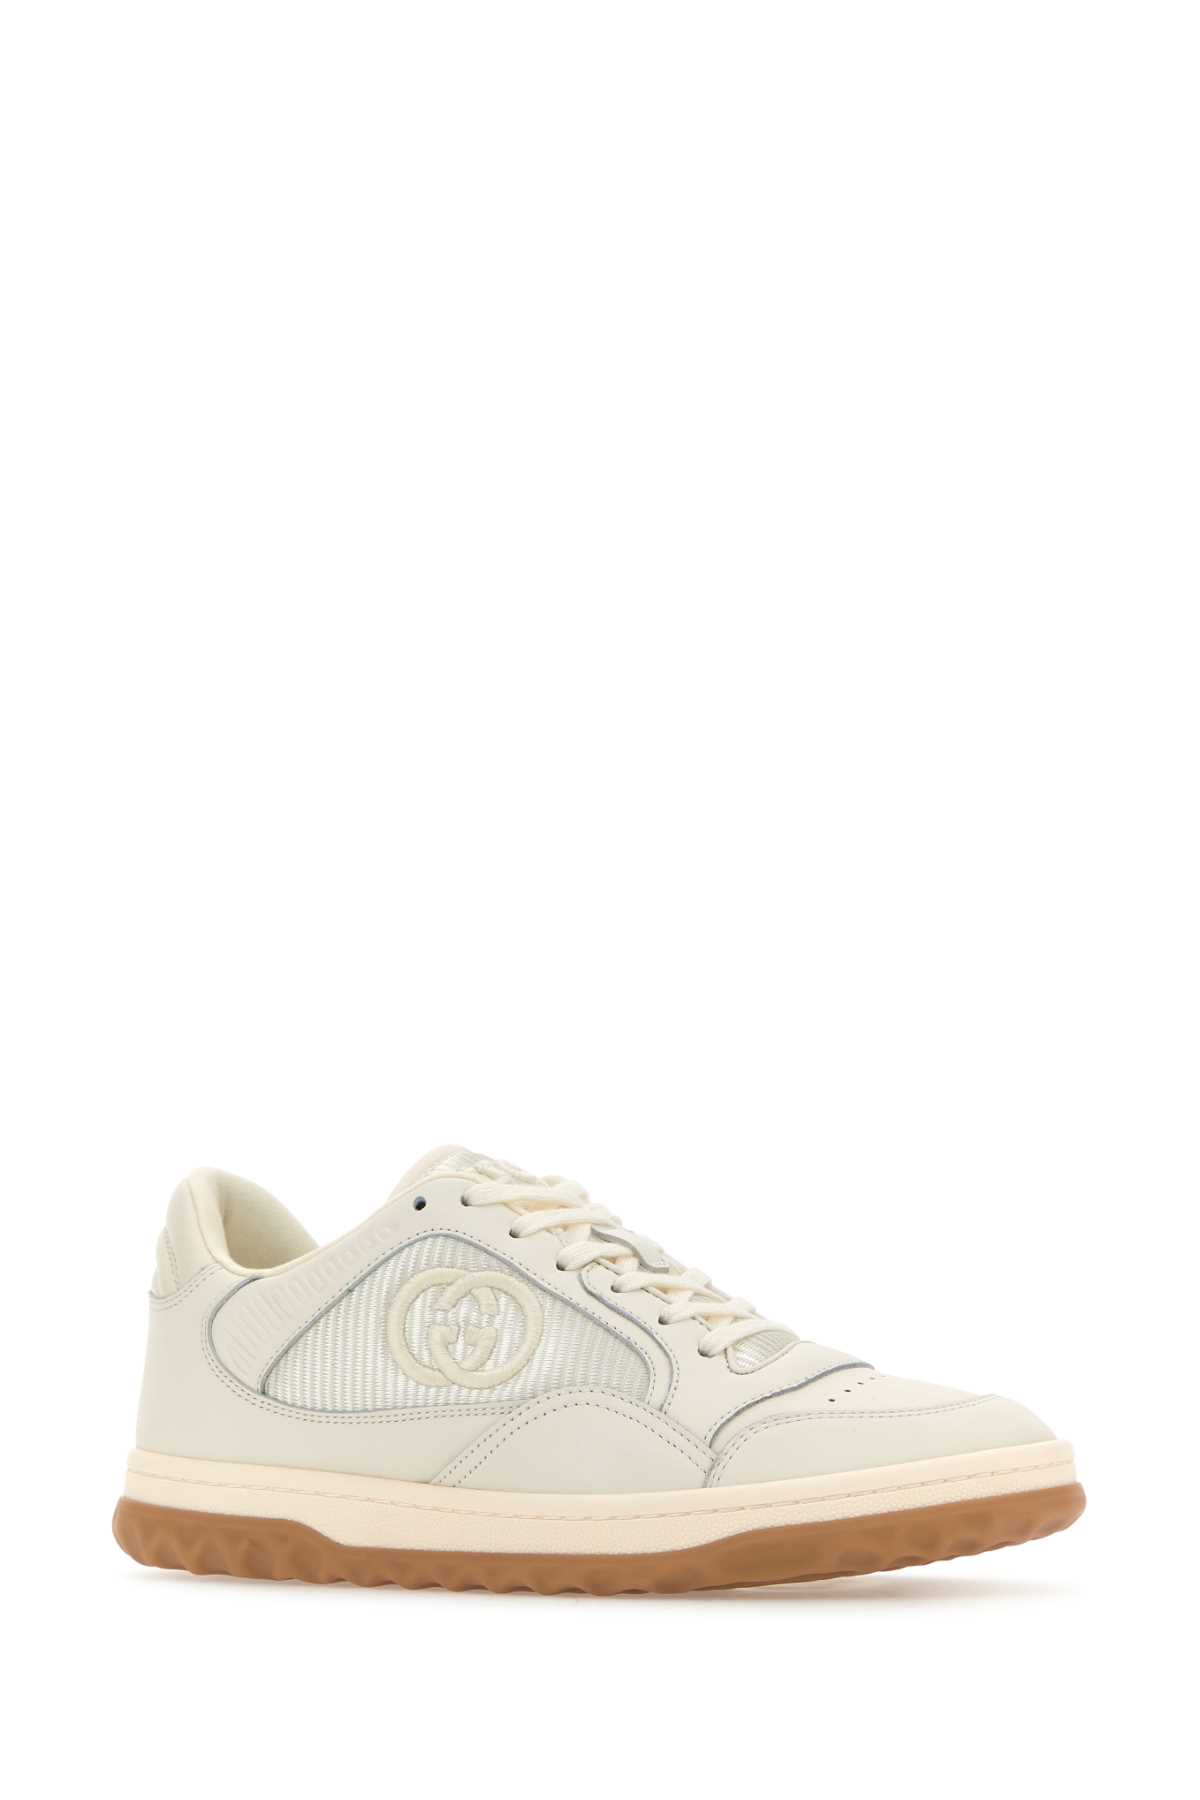 Gucci Chalk Fabric And Leather Mac80 Sneakers In Ofwhowhowhowh